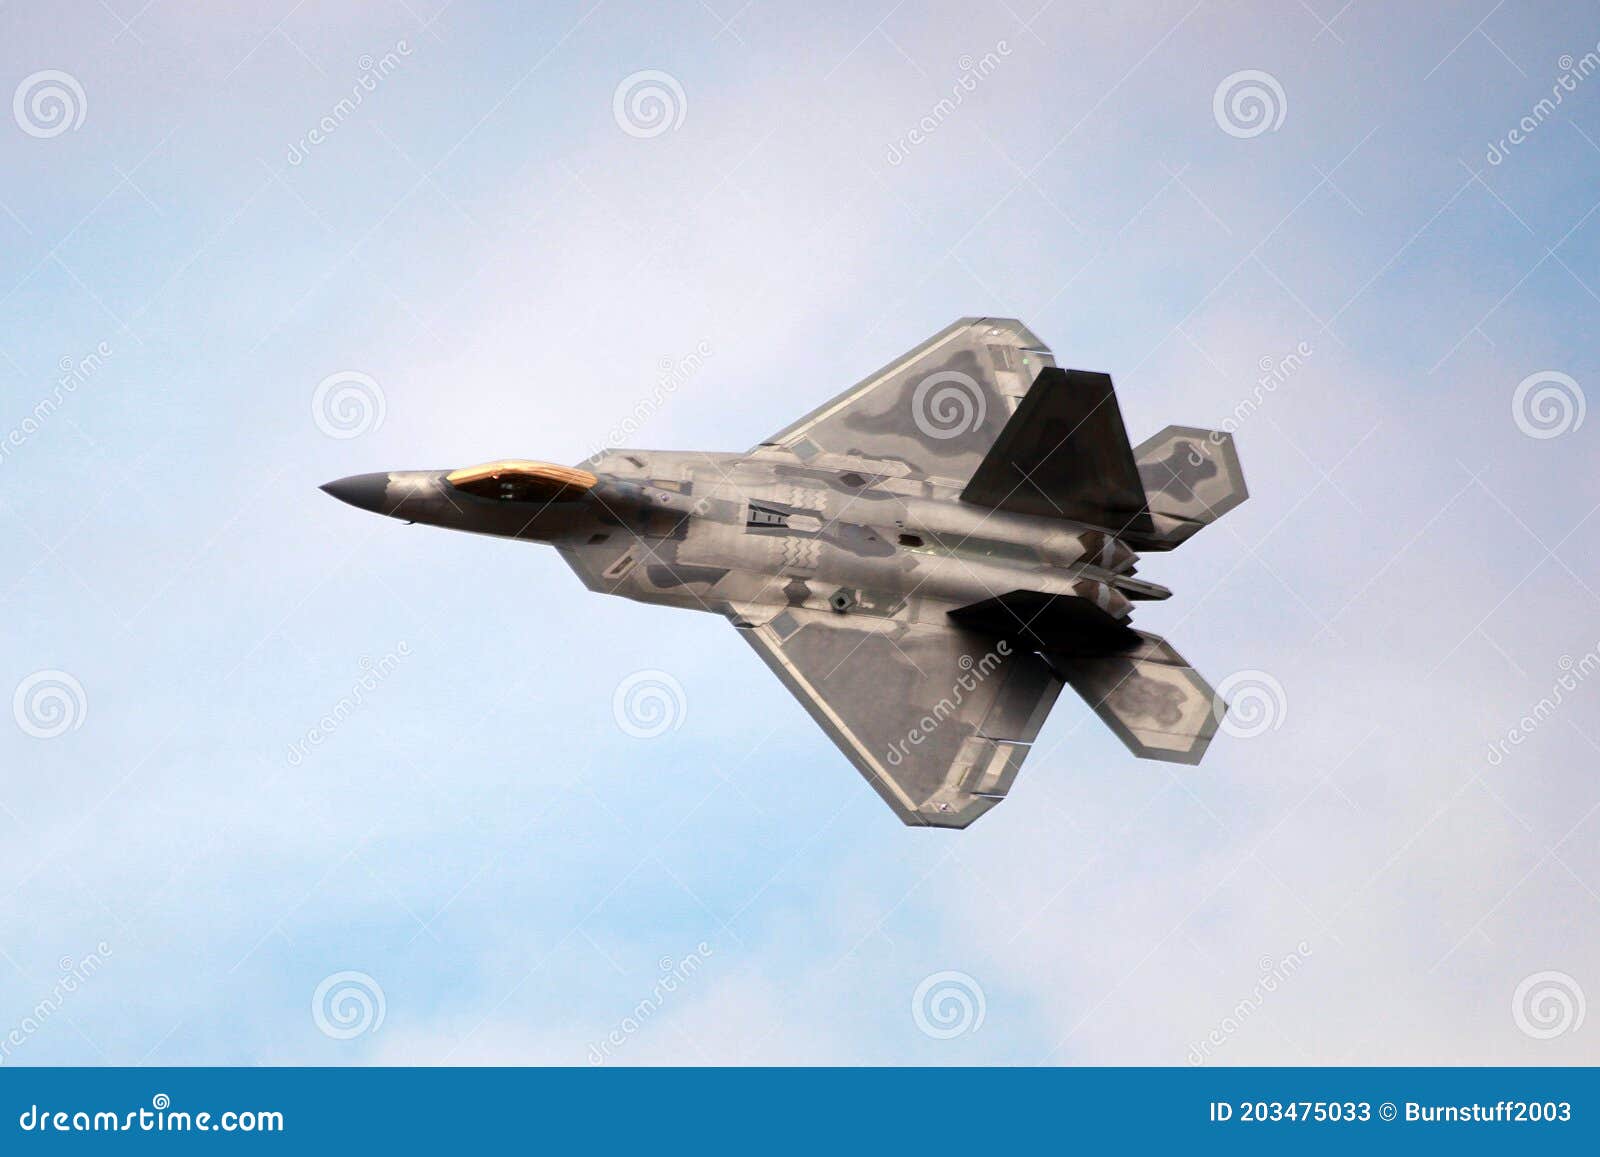 F-22 Raptor PHOTO United States Air Force Stealth Tactical Fighter Jet Top View 